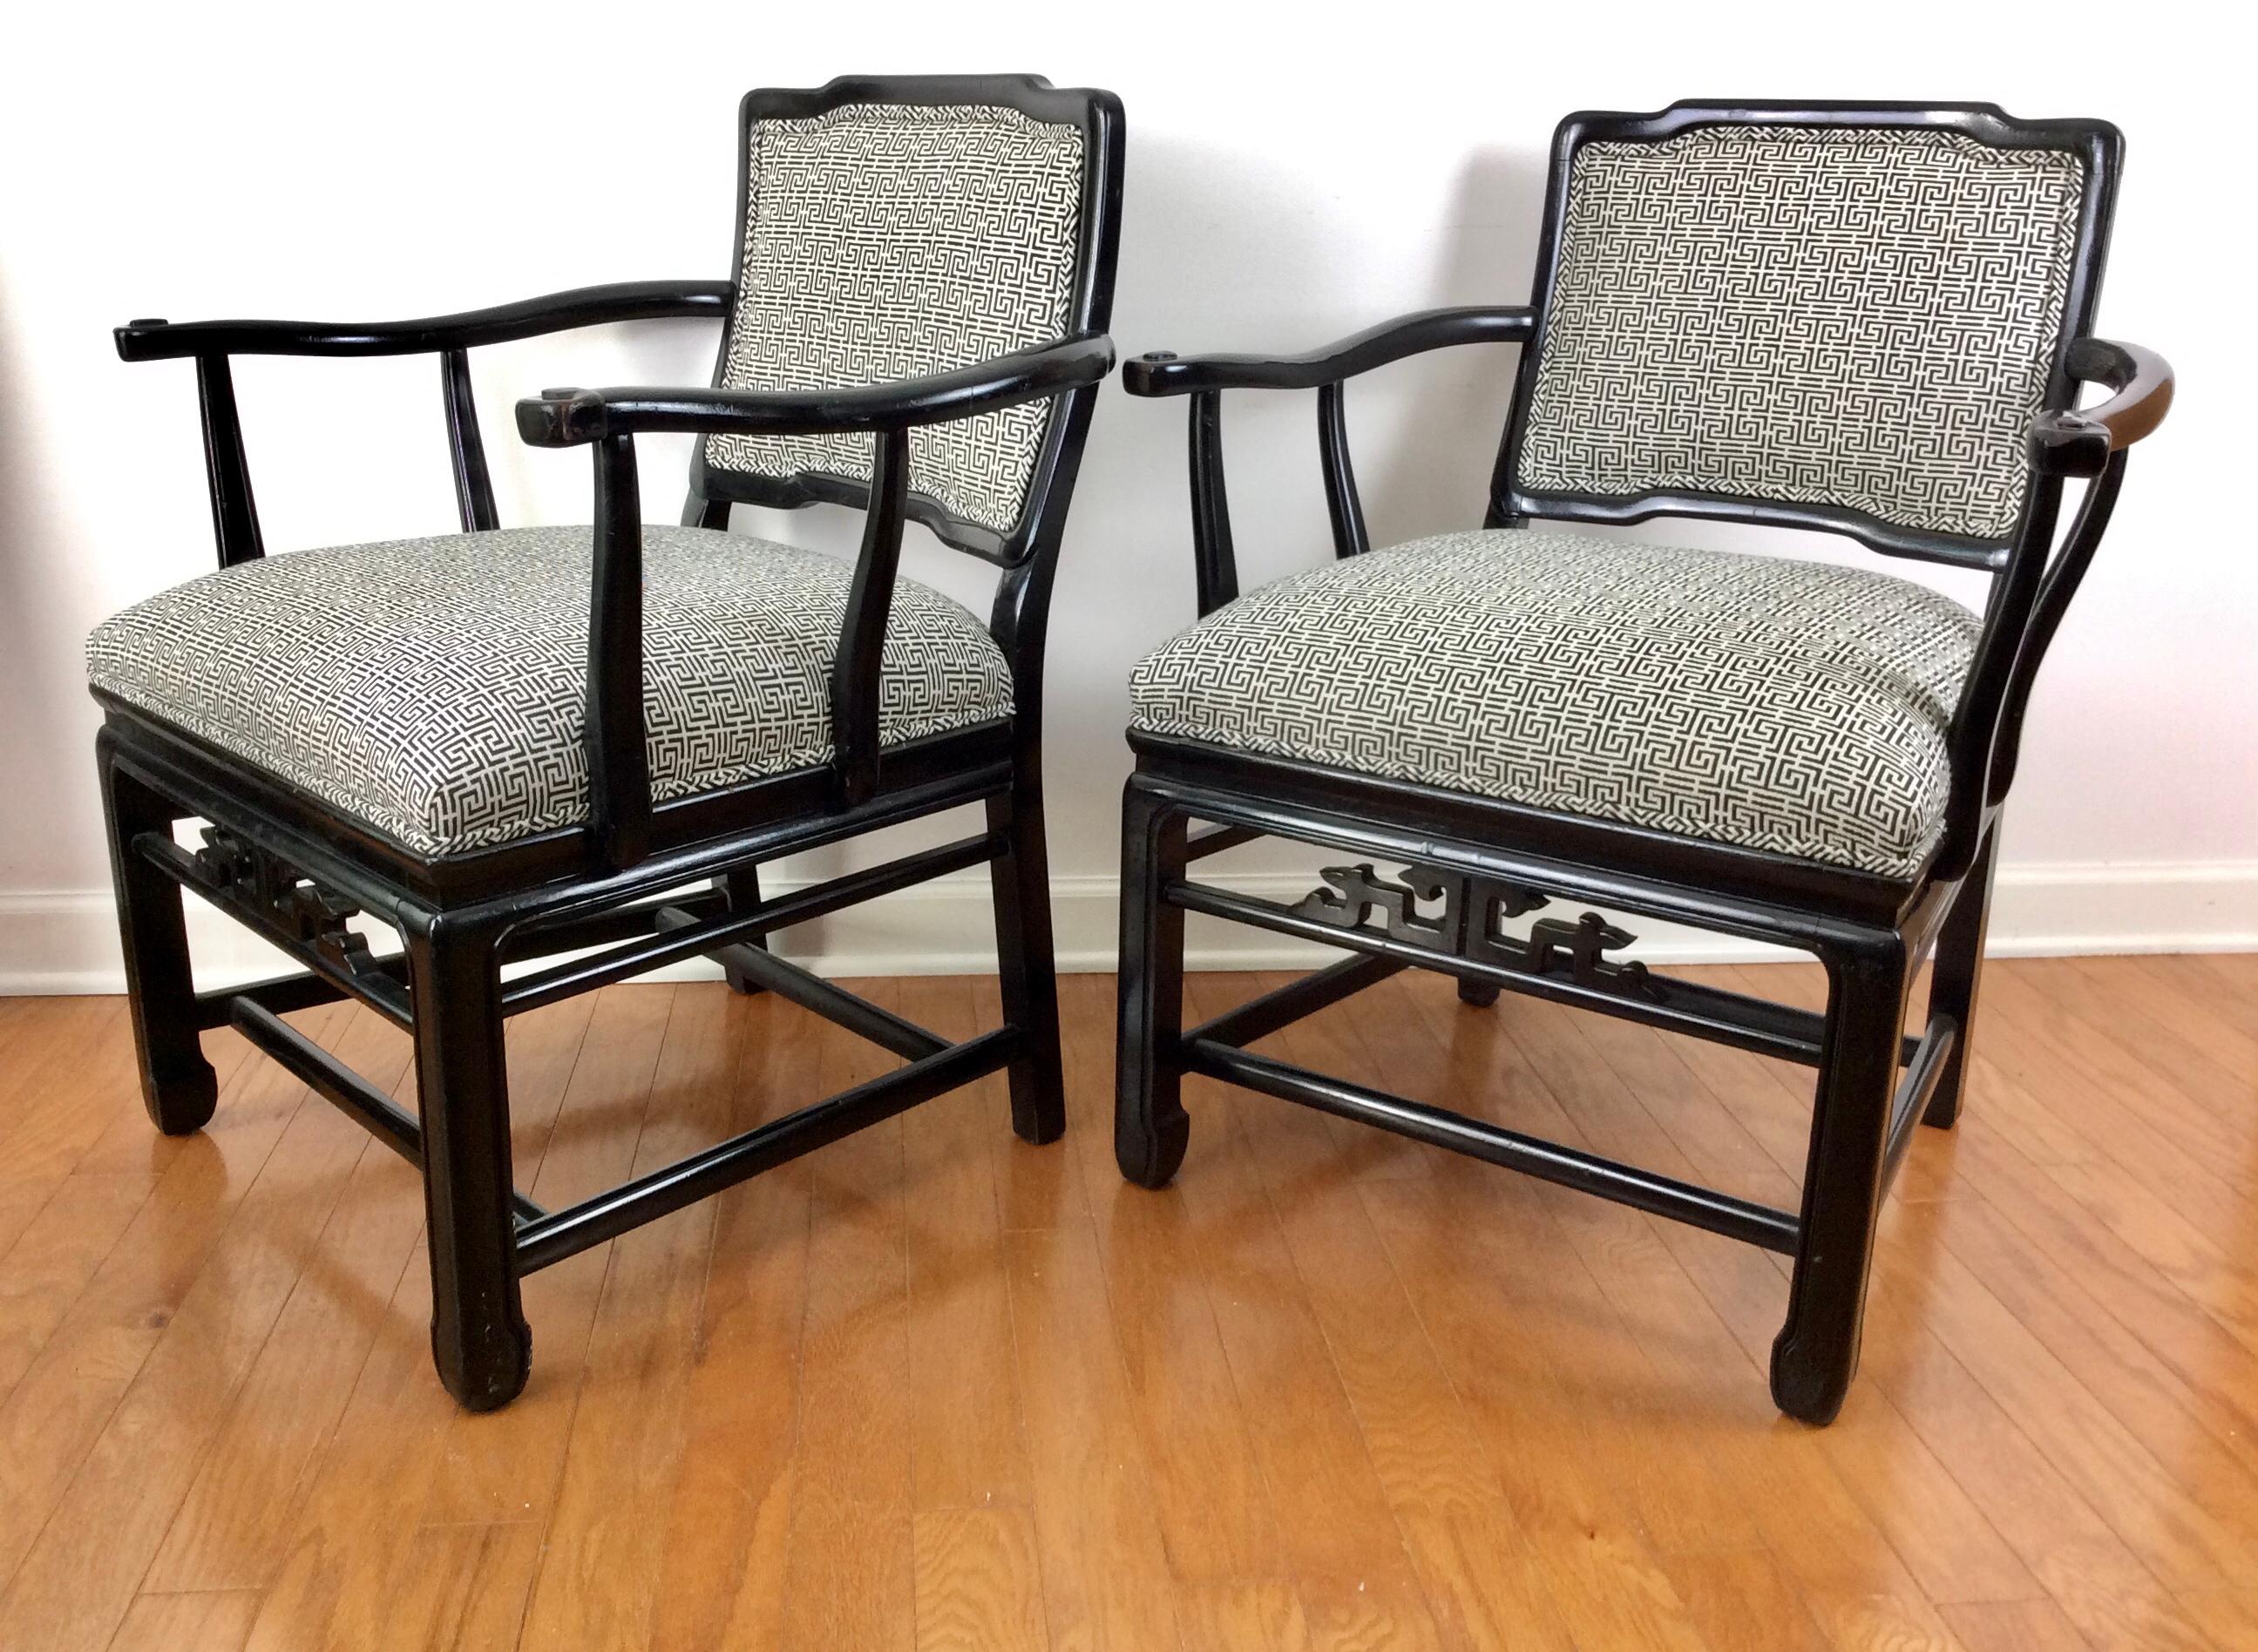 Pair of Chinese Elm Black Lacquered Chairs. Wide horseshoe frame design that is extremely comfortable. Newly reupholstered in a Chinese Double Happiness black and white fabric.

 Seat 19”H, 21”D, Interior Width 24”. Arm Height 27”
